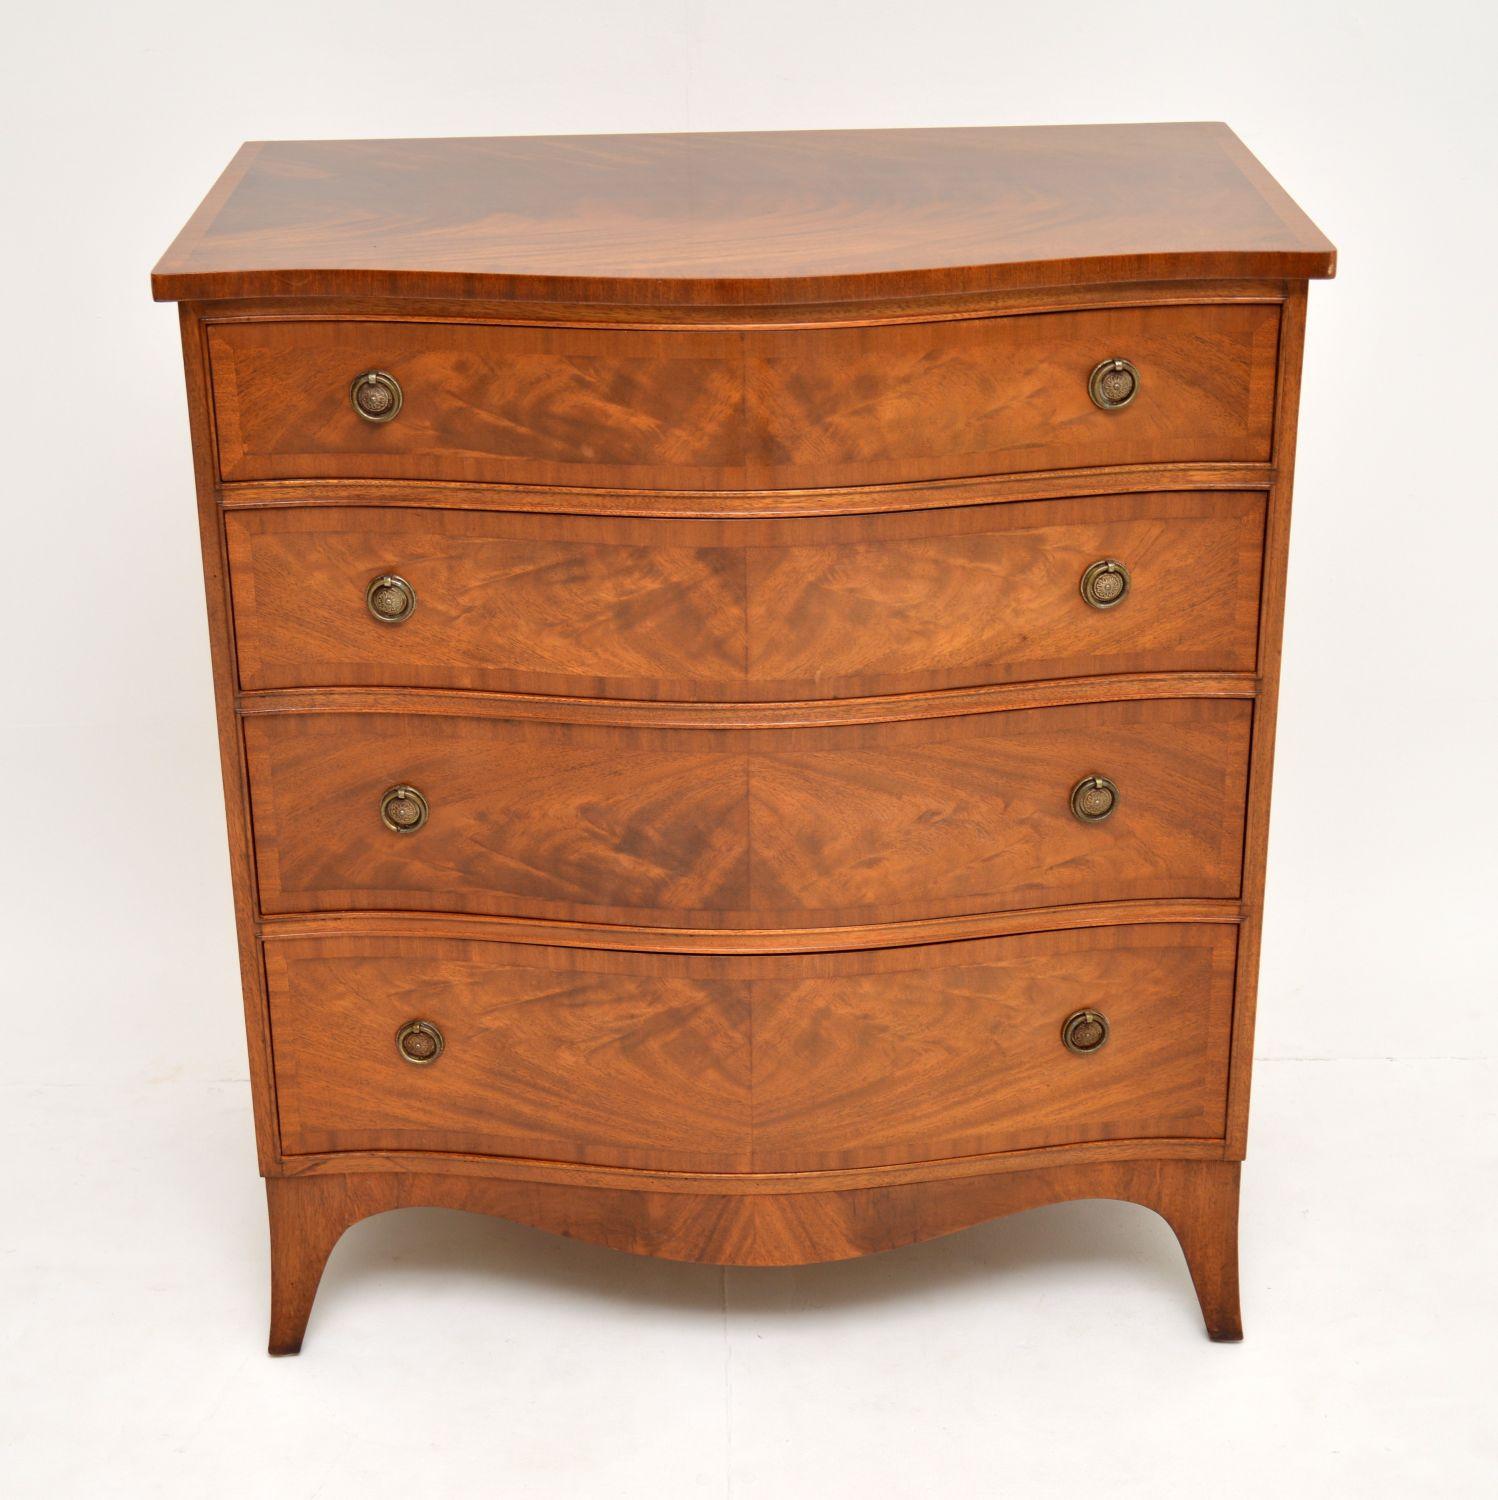 A beautifully made serpentine front chest of drawers, in the antique Georgian style. This dates from circa 1930s-1950s, it’s of excellent quality.

The top and drawer fronts are cross banded. The drawers are graduated in depth and have the